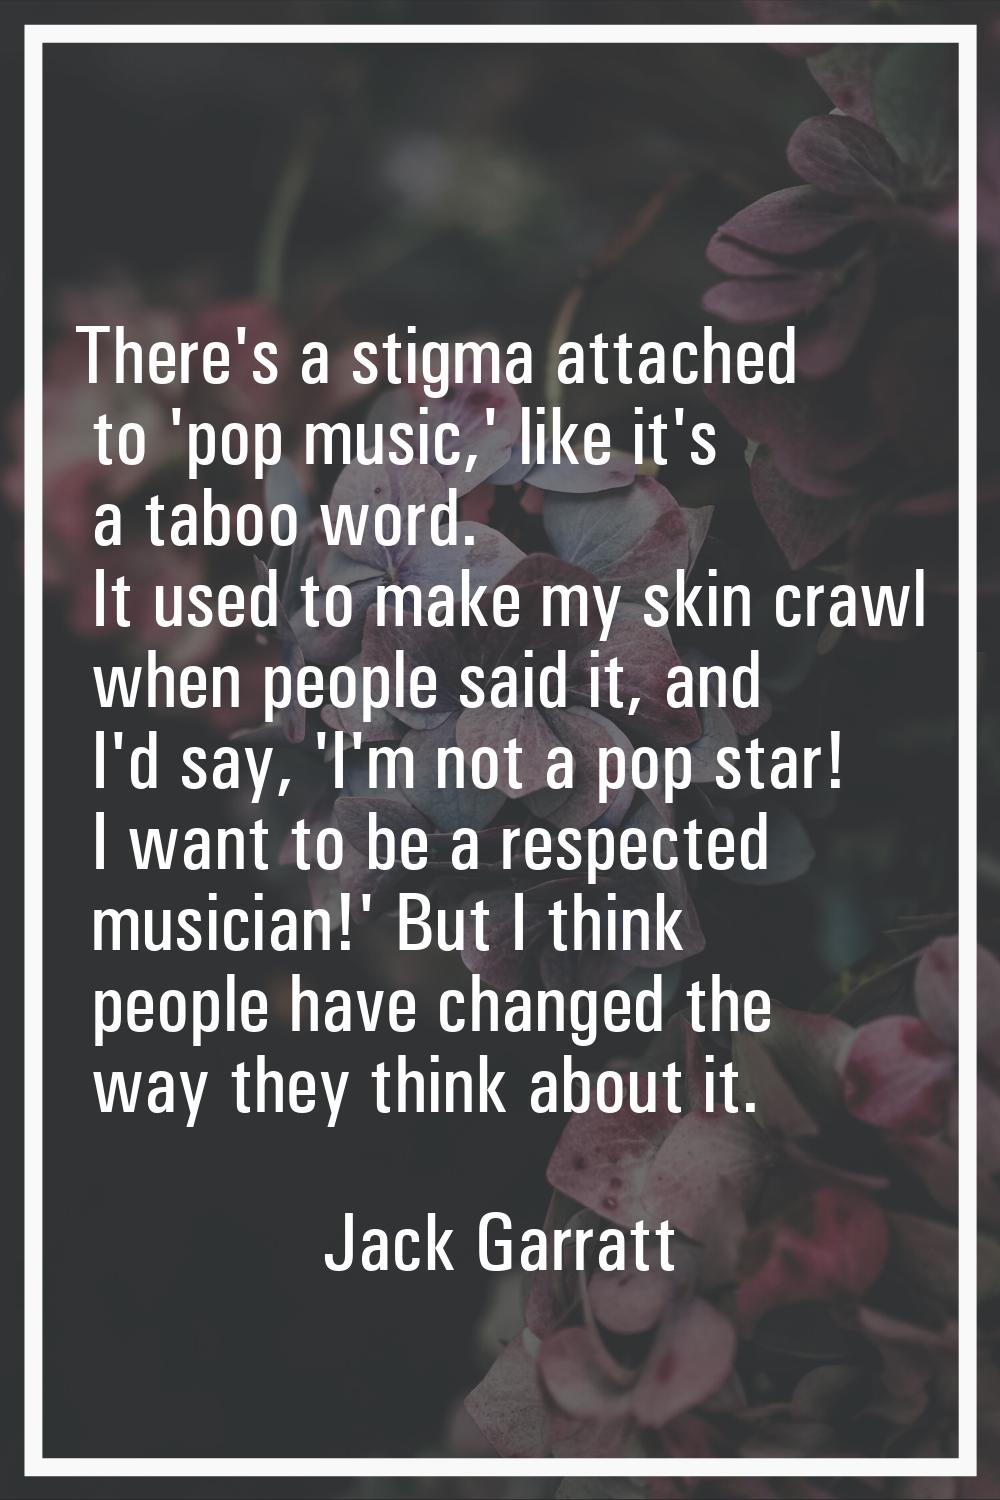 There's a stigma attached to 'pop music,' like it's a taboo word. It used to make my skin crawl whe